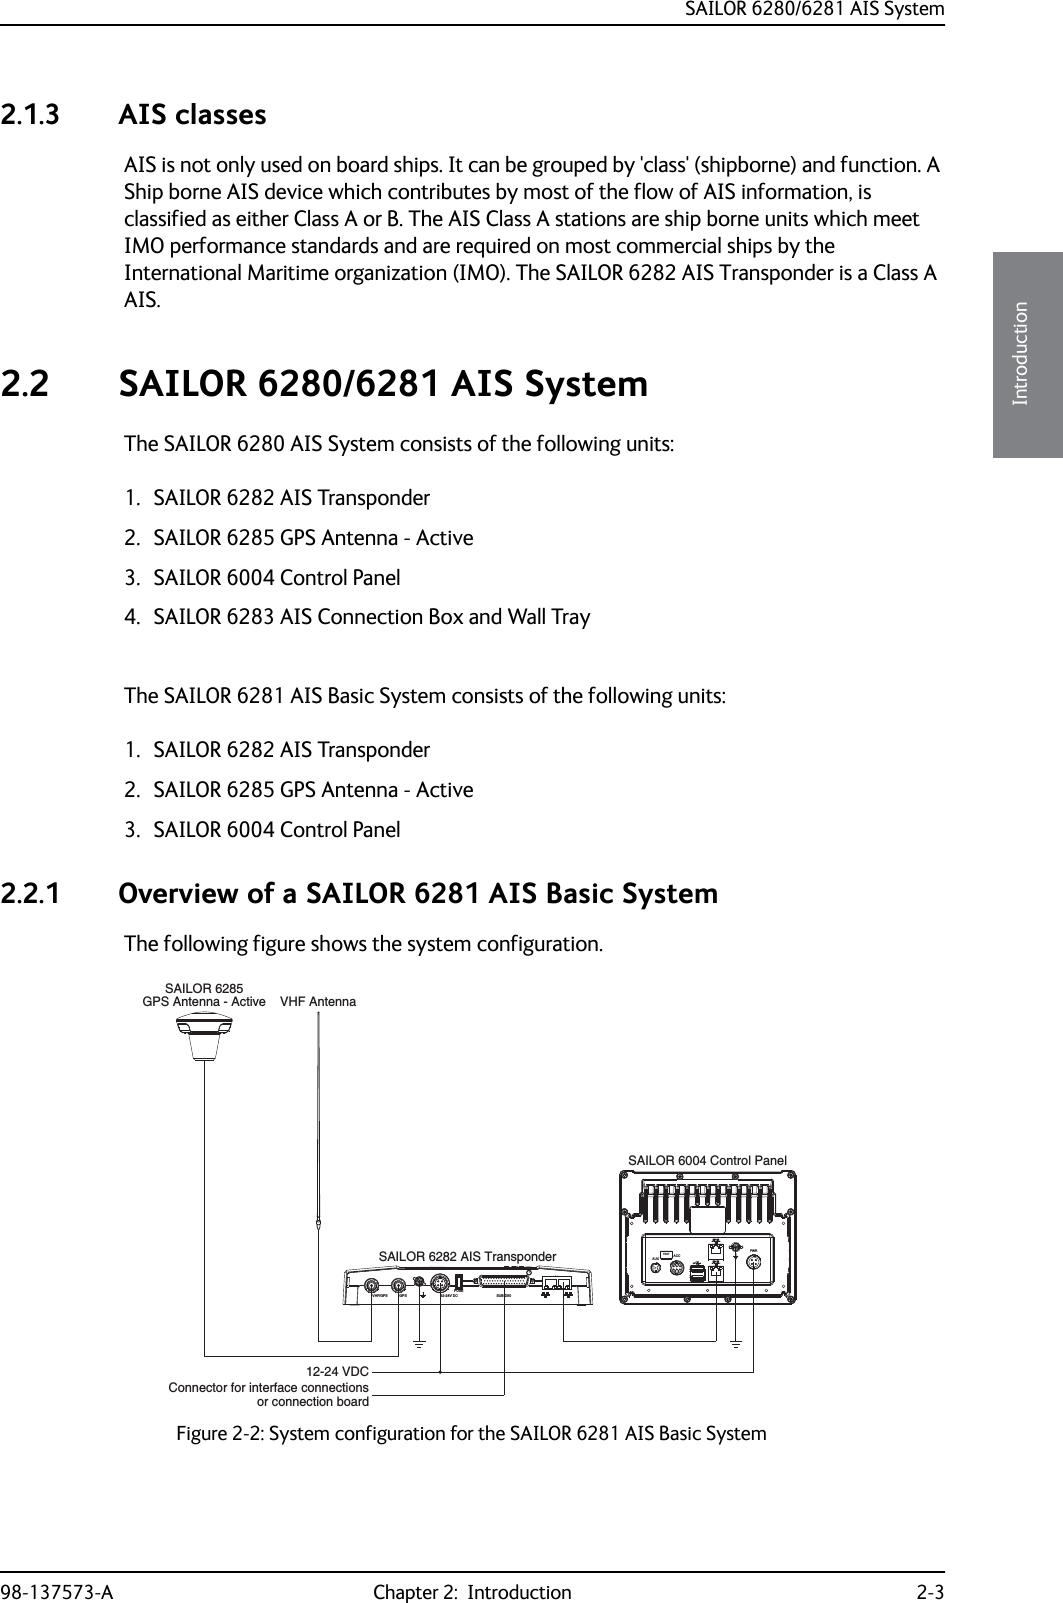 SAILOR 6280/6281 AIS System98-137573-A Chapter 2:  Introduction 2-32222Introduction2.1.3 AIS classesAIS is not only used on board ships. It can be grouped by &apos;class&apos; (shipborne) and function. A Ship borne AIS device which contributes by most of the flow of AIS information, is classified as either Class A or B. The AIS Class A stations are ship borne units which meet IMO performance standards and are required on most commercial ships by the International Maritime organization (IMO). The SAILOR 6282 AIS Transponder is a Class A AIS. 2.2 SAILOR 6280/6281 AIS SystemThe SAILOR 6280 AIS System consists of the following units:1. SAILOR 6282 AIS Transponder2. SAILOR 6285 GPS Antenna - Active3. SAILOR 6004 Control Panel4. SAILOR 6283 AIS Connection Box and Wall TrayThe SAILOR 6281 AIS Basic System consists of the following units:1. SAILOR 6282 AIS Transponder2. SAILOR 6285 GPS Antenna - Active3. SAILOR 6004 Control Panel2.2.1 Overview of a SAILOR 6281 AIS Basic SystemThe following figure shows the system configuration.Figure 2-2: System configuration for the SAILOR 6281 AIS Basic SystemGPS Antenna - ActiveSAILOR 6004 Control PanelVHF Antenna12-24 VDCConnector for interface connectionsVHF/GPSGPS12-24V DCFUSESUB-D501SAILOR 6282 AIS Transponderor connection boardSAILOR 6285ACCAUXTESTPWR